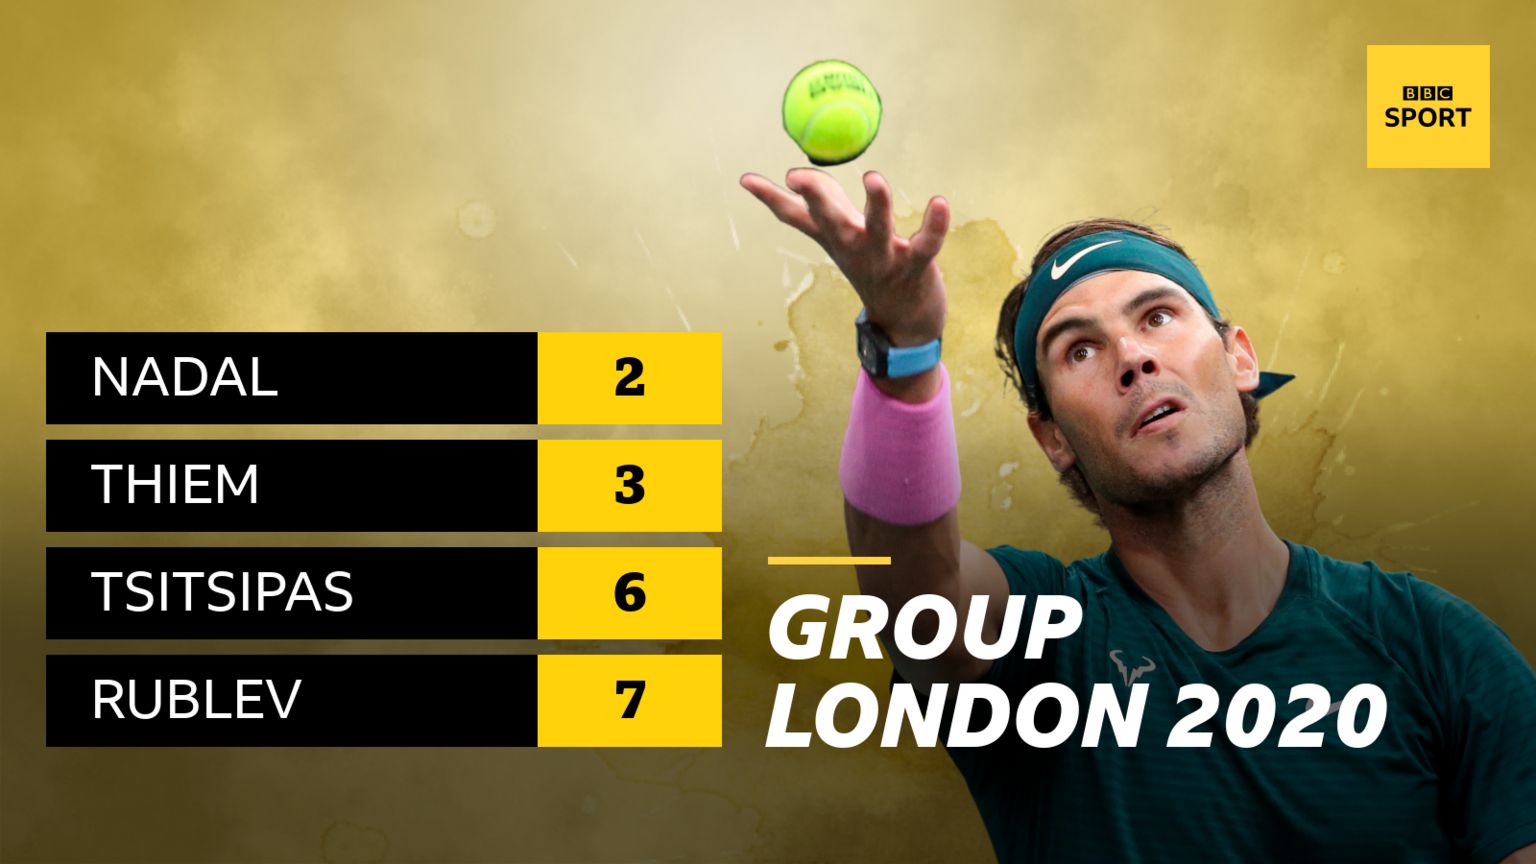 Rafael Nadal is seeded second, Dominic Thiem is seeded third, Stefanos Tsitsipas is seeded sixth and Andrey Rublev is seeded seventh